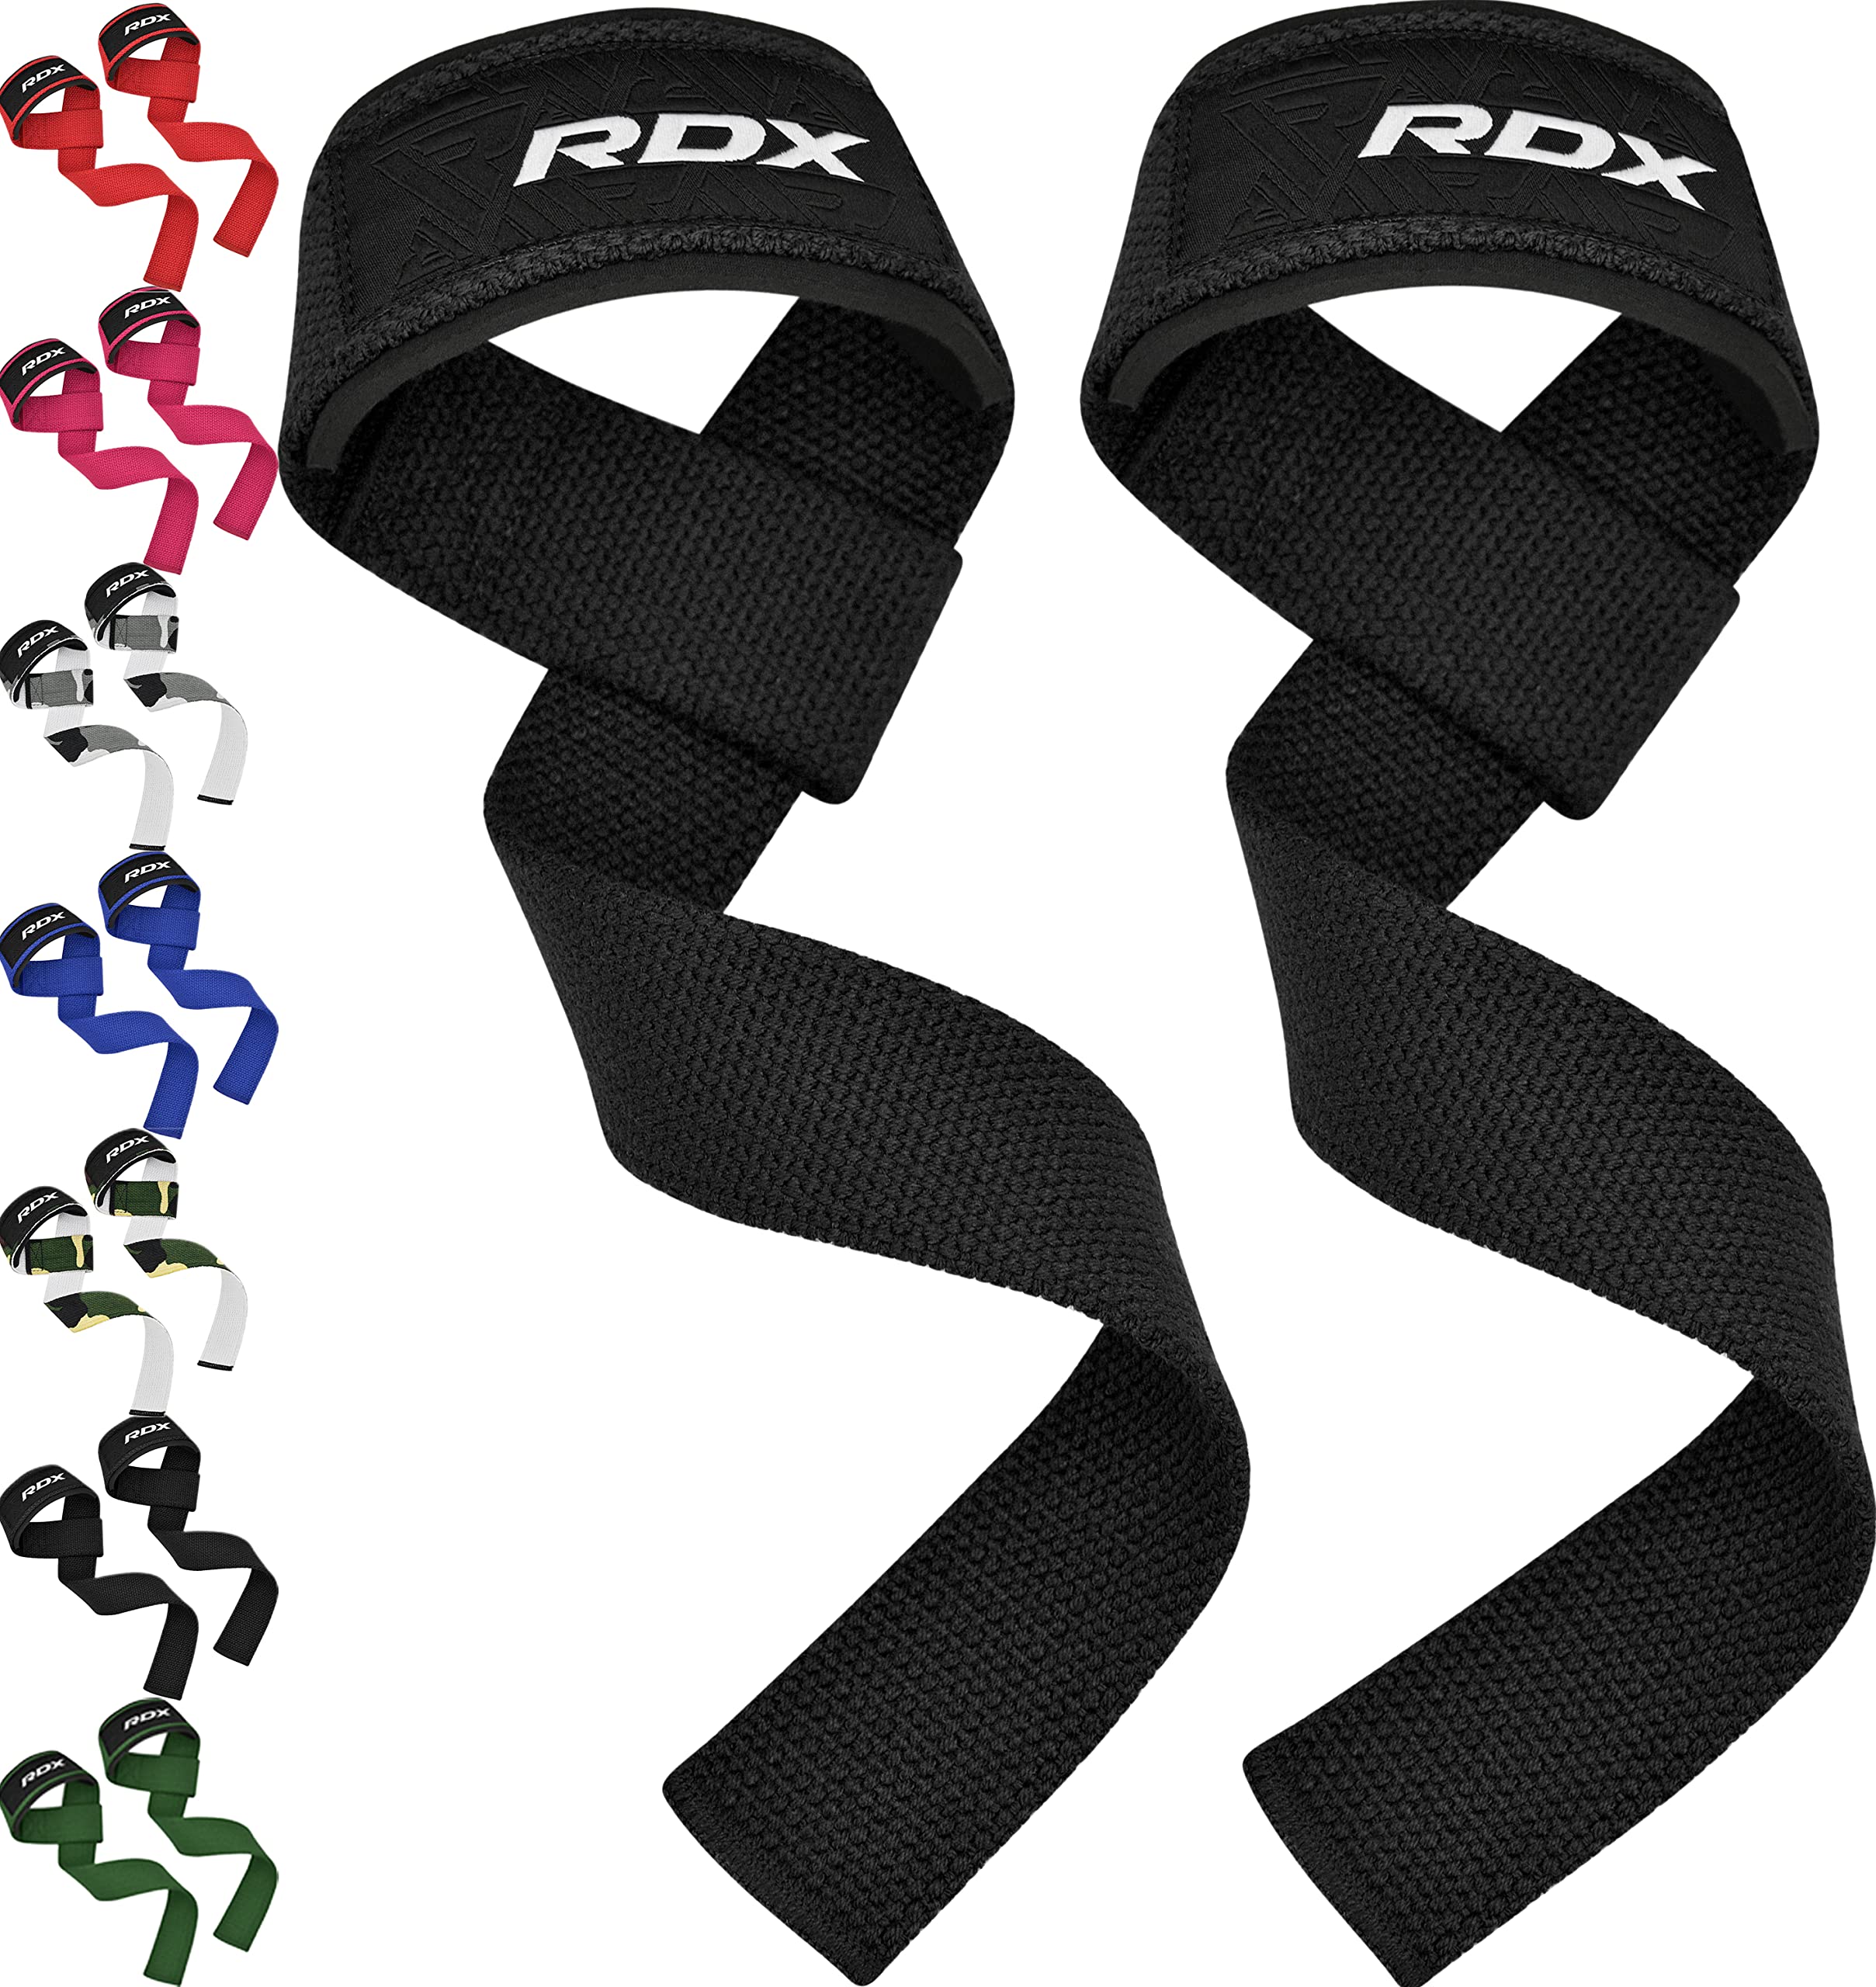 Gymreapers Lifting Wrist Straps for Weightlifting, Bodybuilding, Powerlifting, Strength Training, Deadlifts - Padded Neoprene with 18 Cotton (Black)